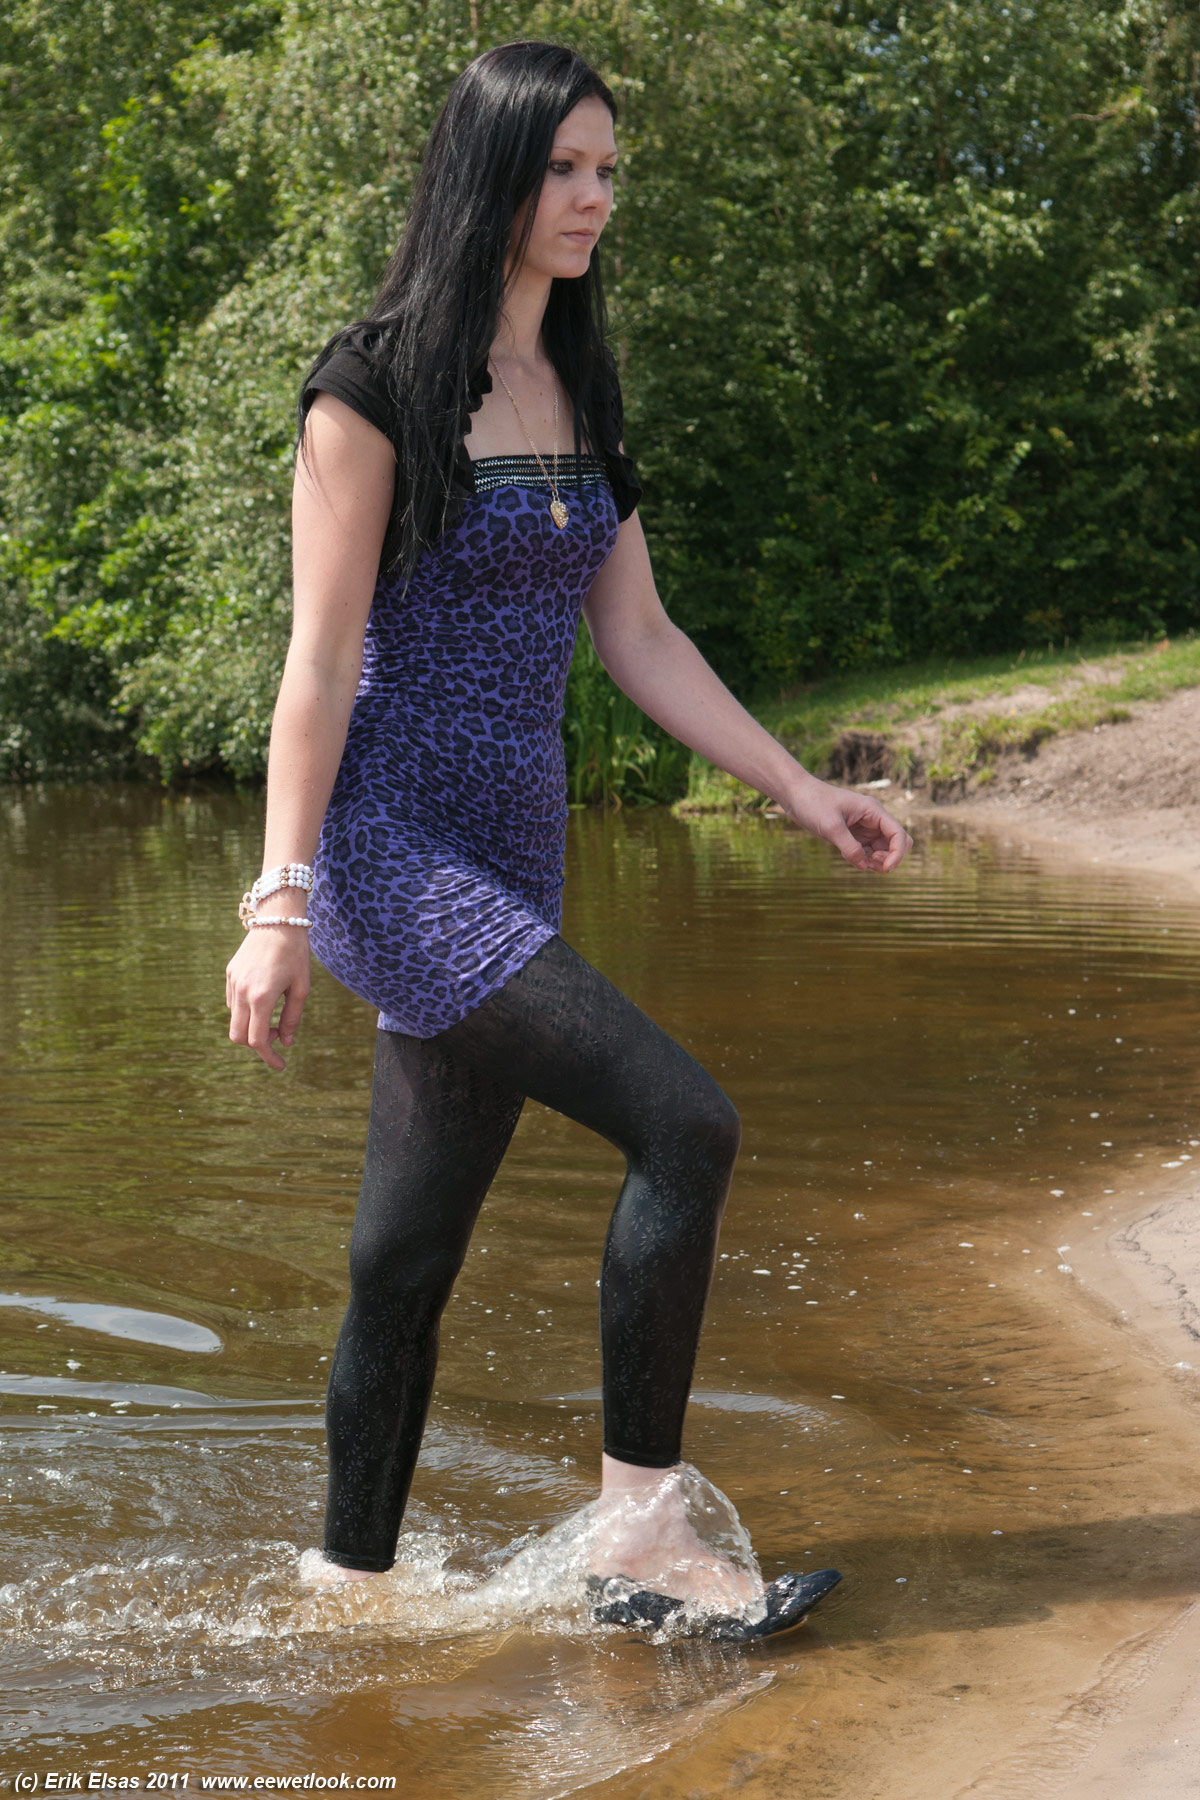 Wwf 56035 Playing With A Garden Hose In White Skirt And Leggings Wetlook World Forum